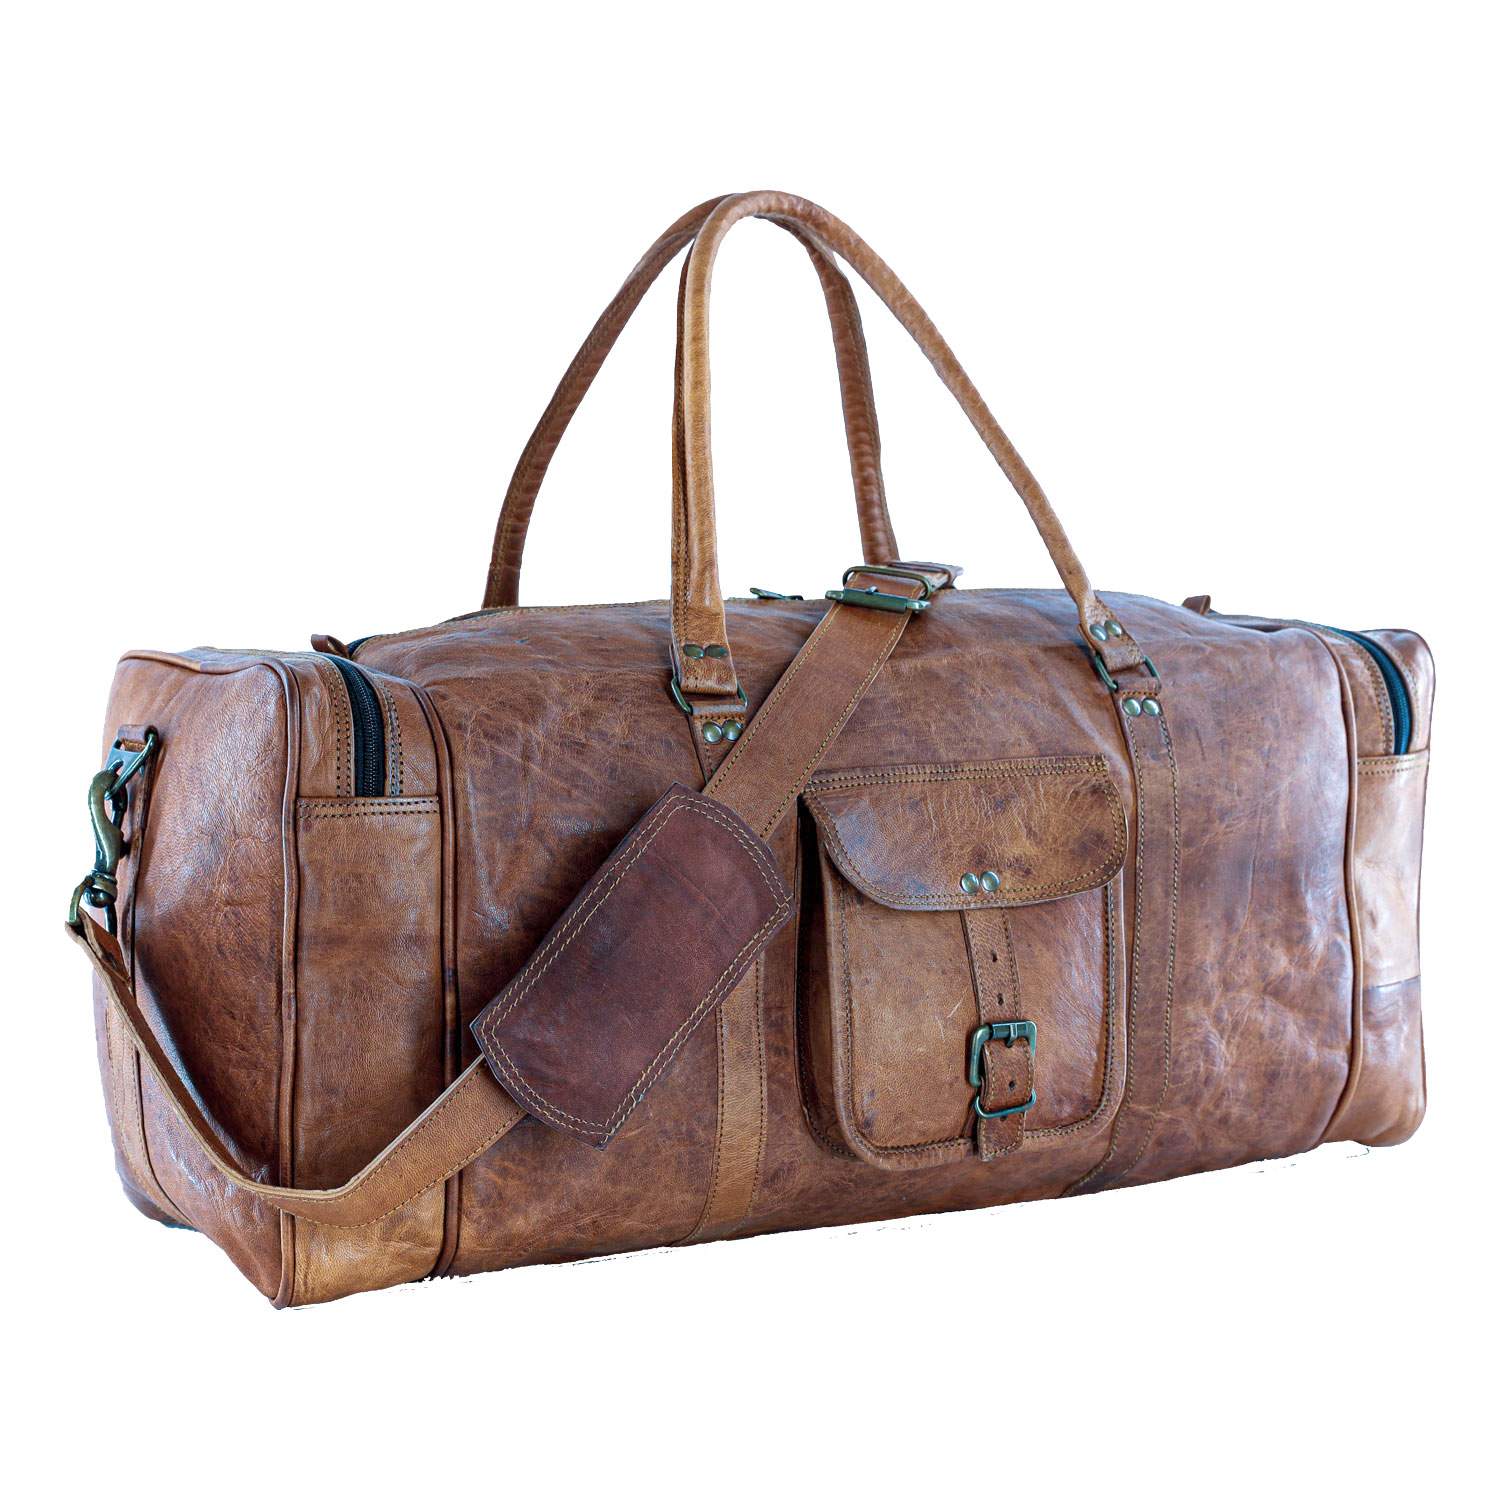 KPL 21 Inch Vintage Leather Duffel Travel Gym Sports Overnight Weekend Duffle Bags for men and women - image 5 of 9